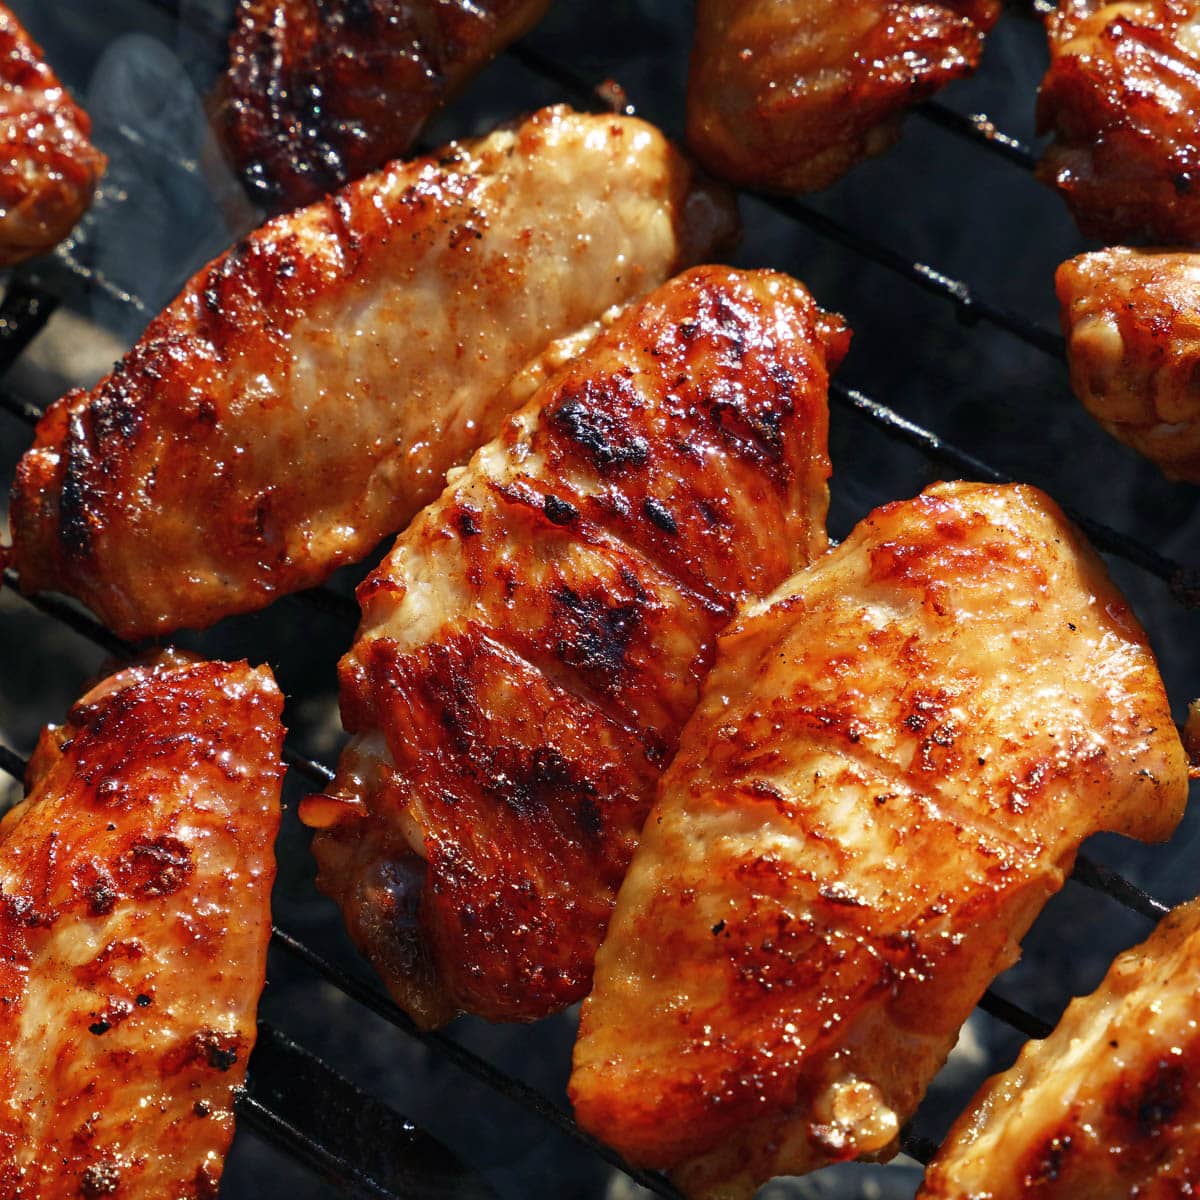 Chicken wings cooking on a BBQ grill